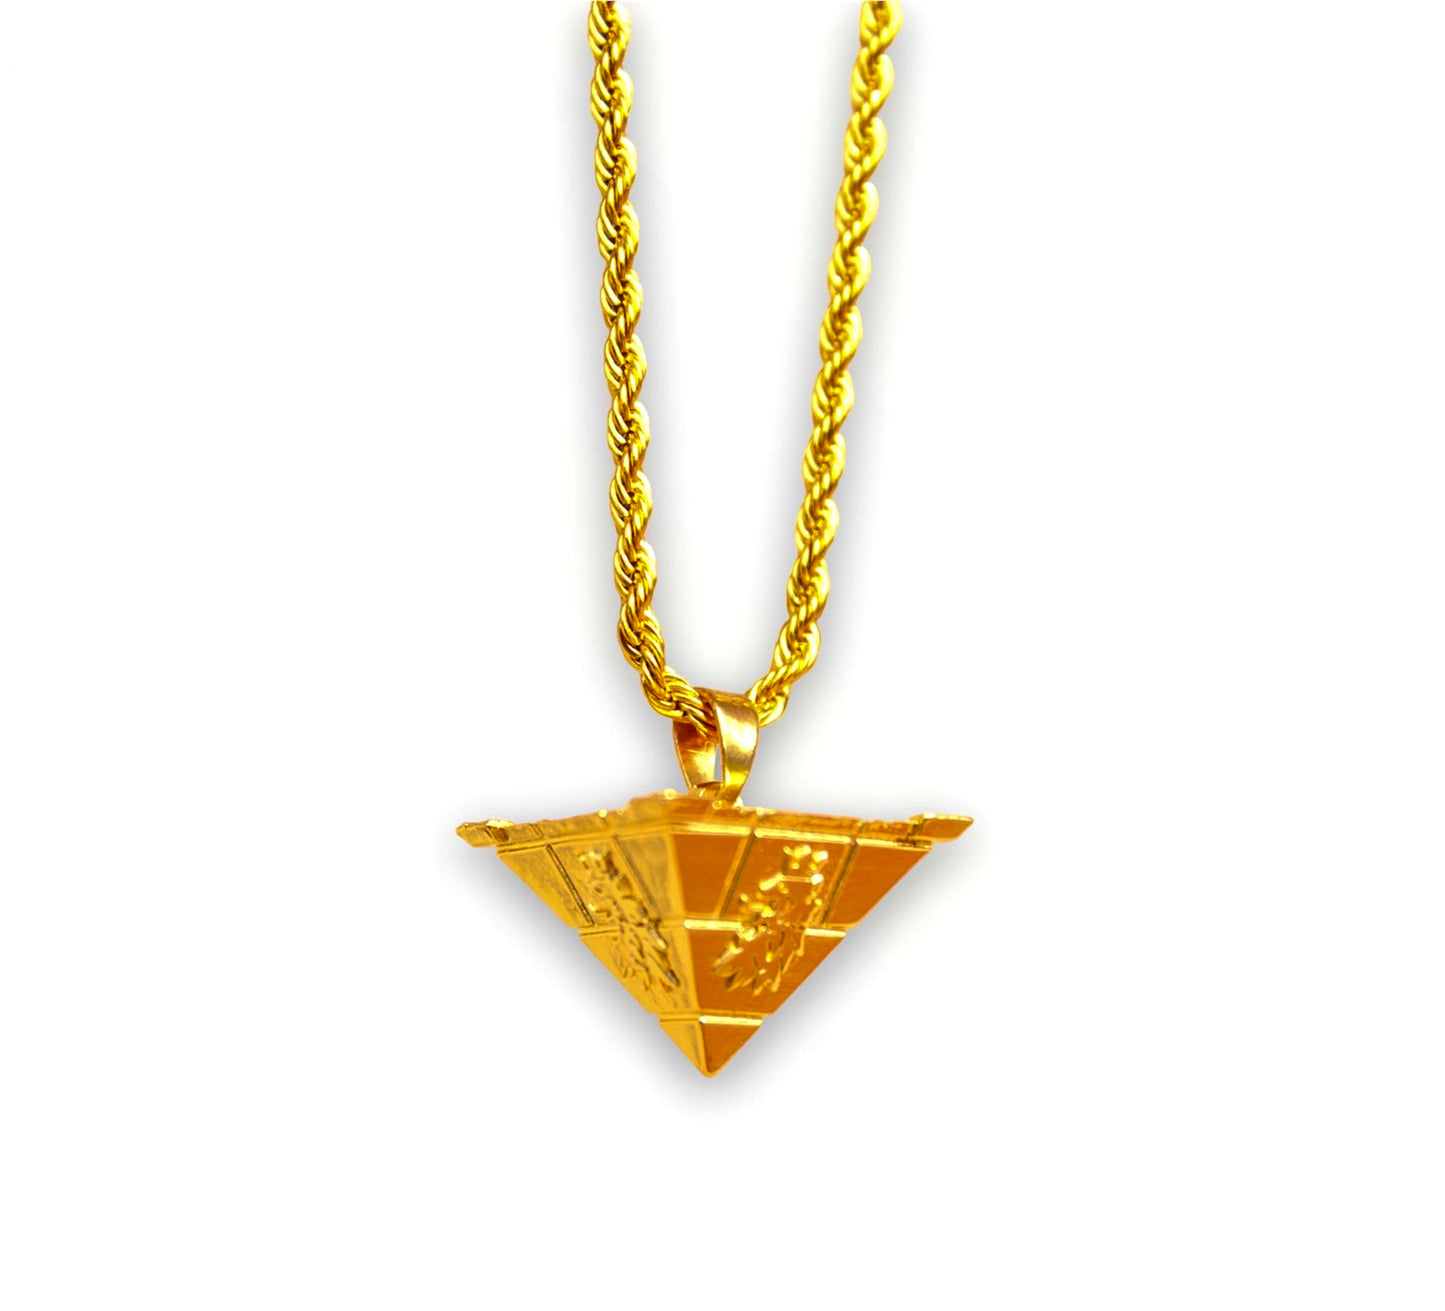 Royalty10 Lion Motif Gold Pyramid Pendant Necklace - A striking gold necklace featuring a pyramid-shaped pendant adorned with the iconic Royalty10 lion motif design.